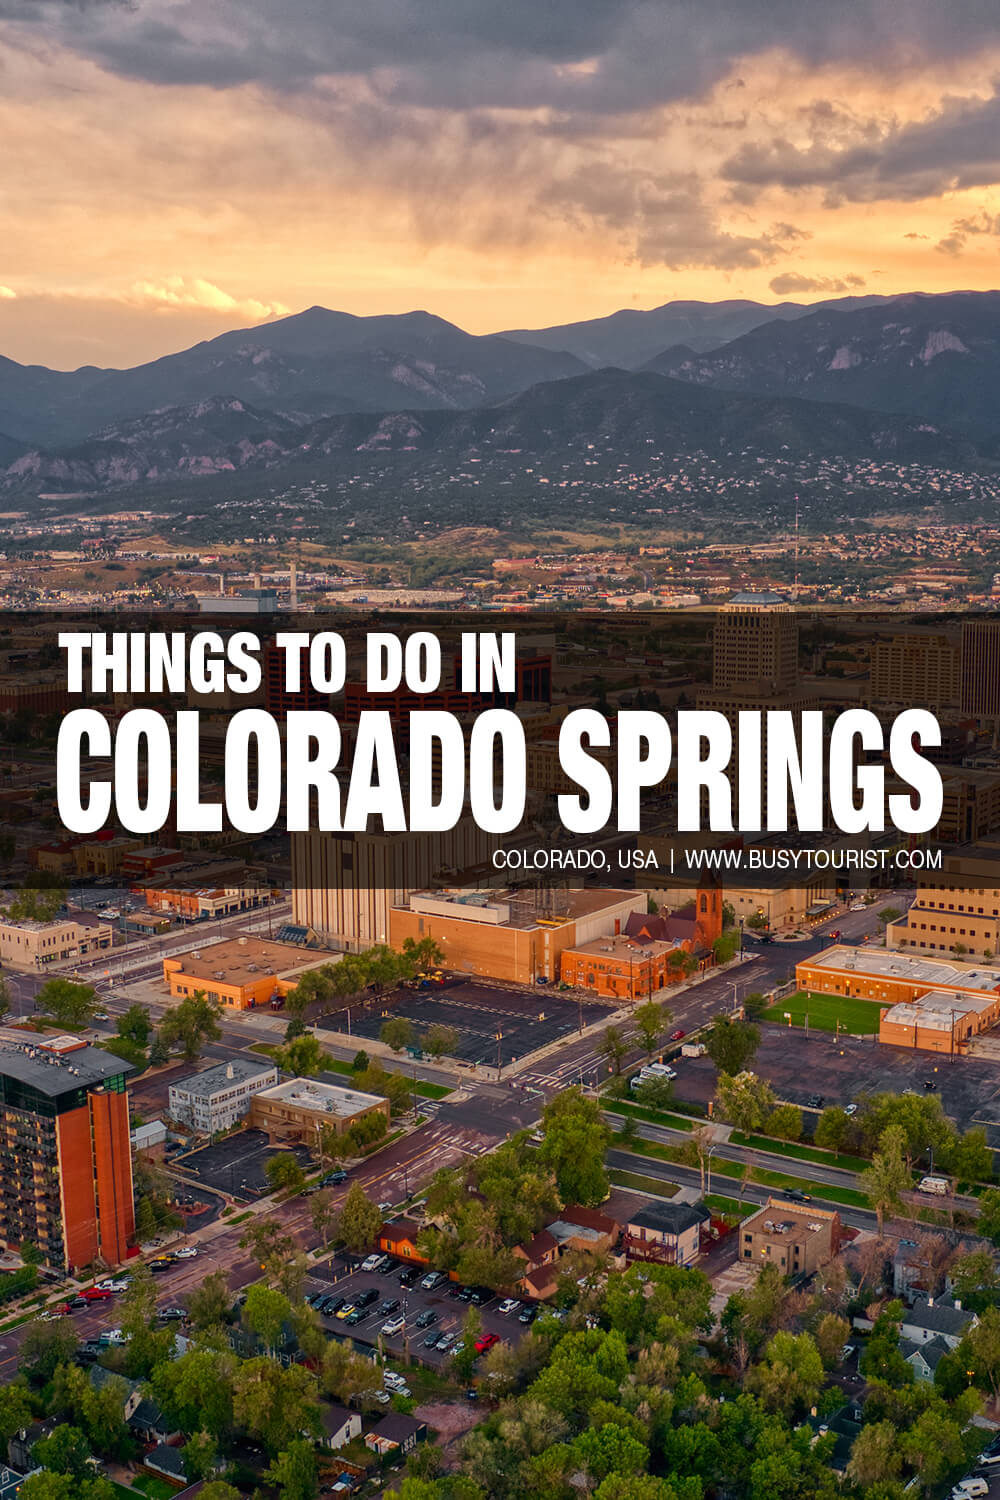 27 Fun Things To Do In Colorado Springs (CO) Attractions & Activities